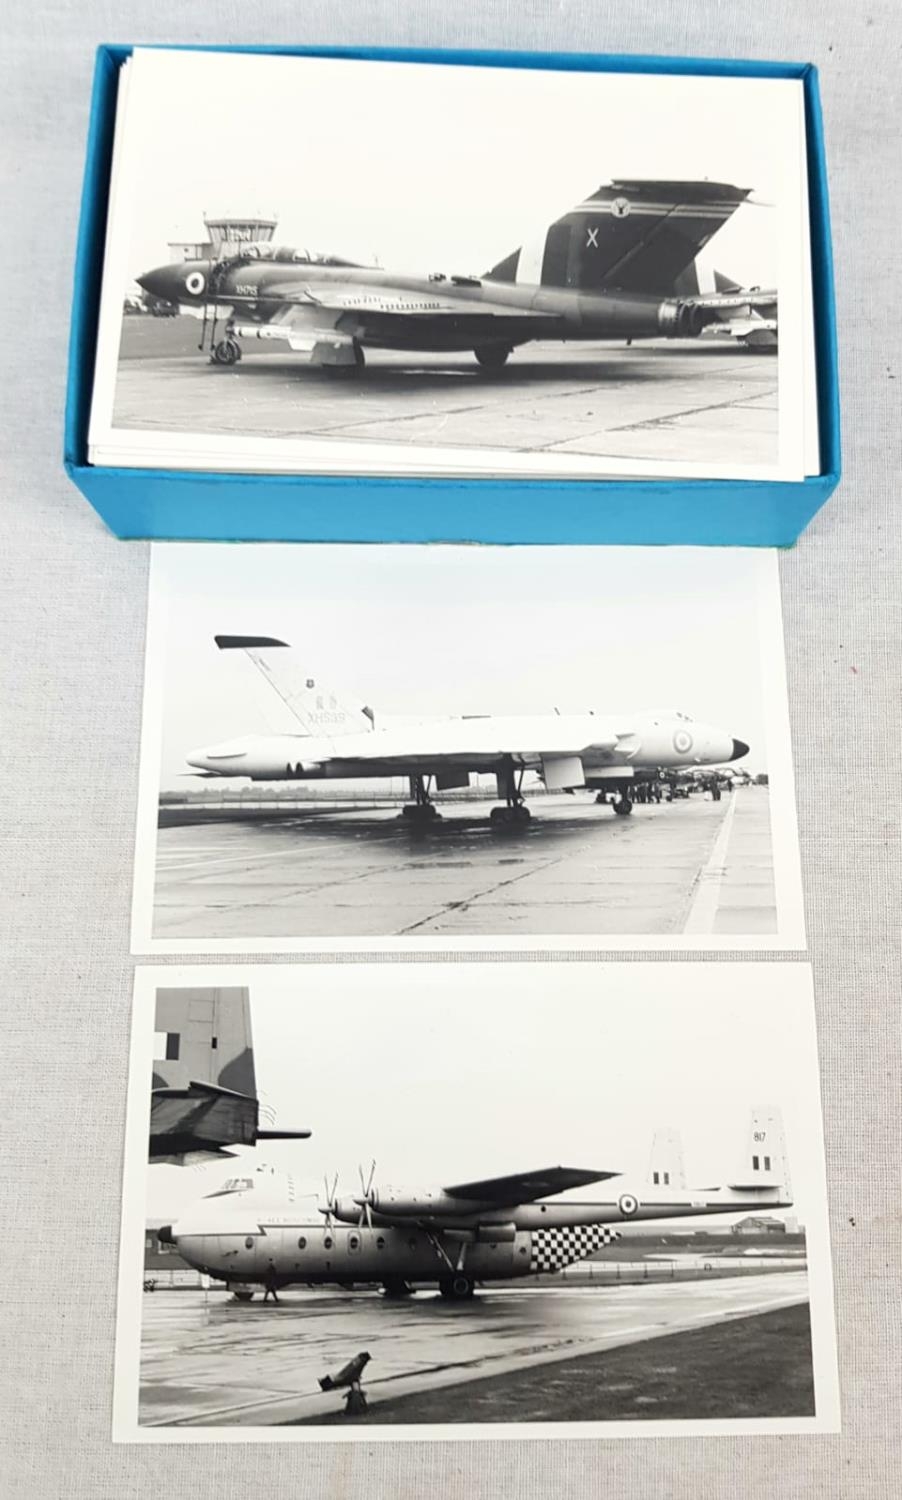 Over 400 Original Black and White Aircraft Photographs. Contains pictures taken from the 1960s to - Image 3 of 4